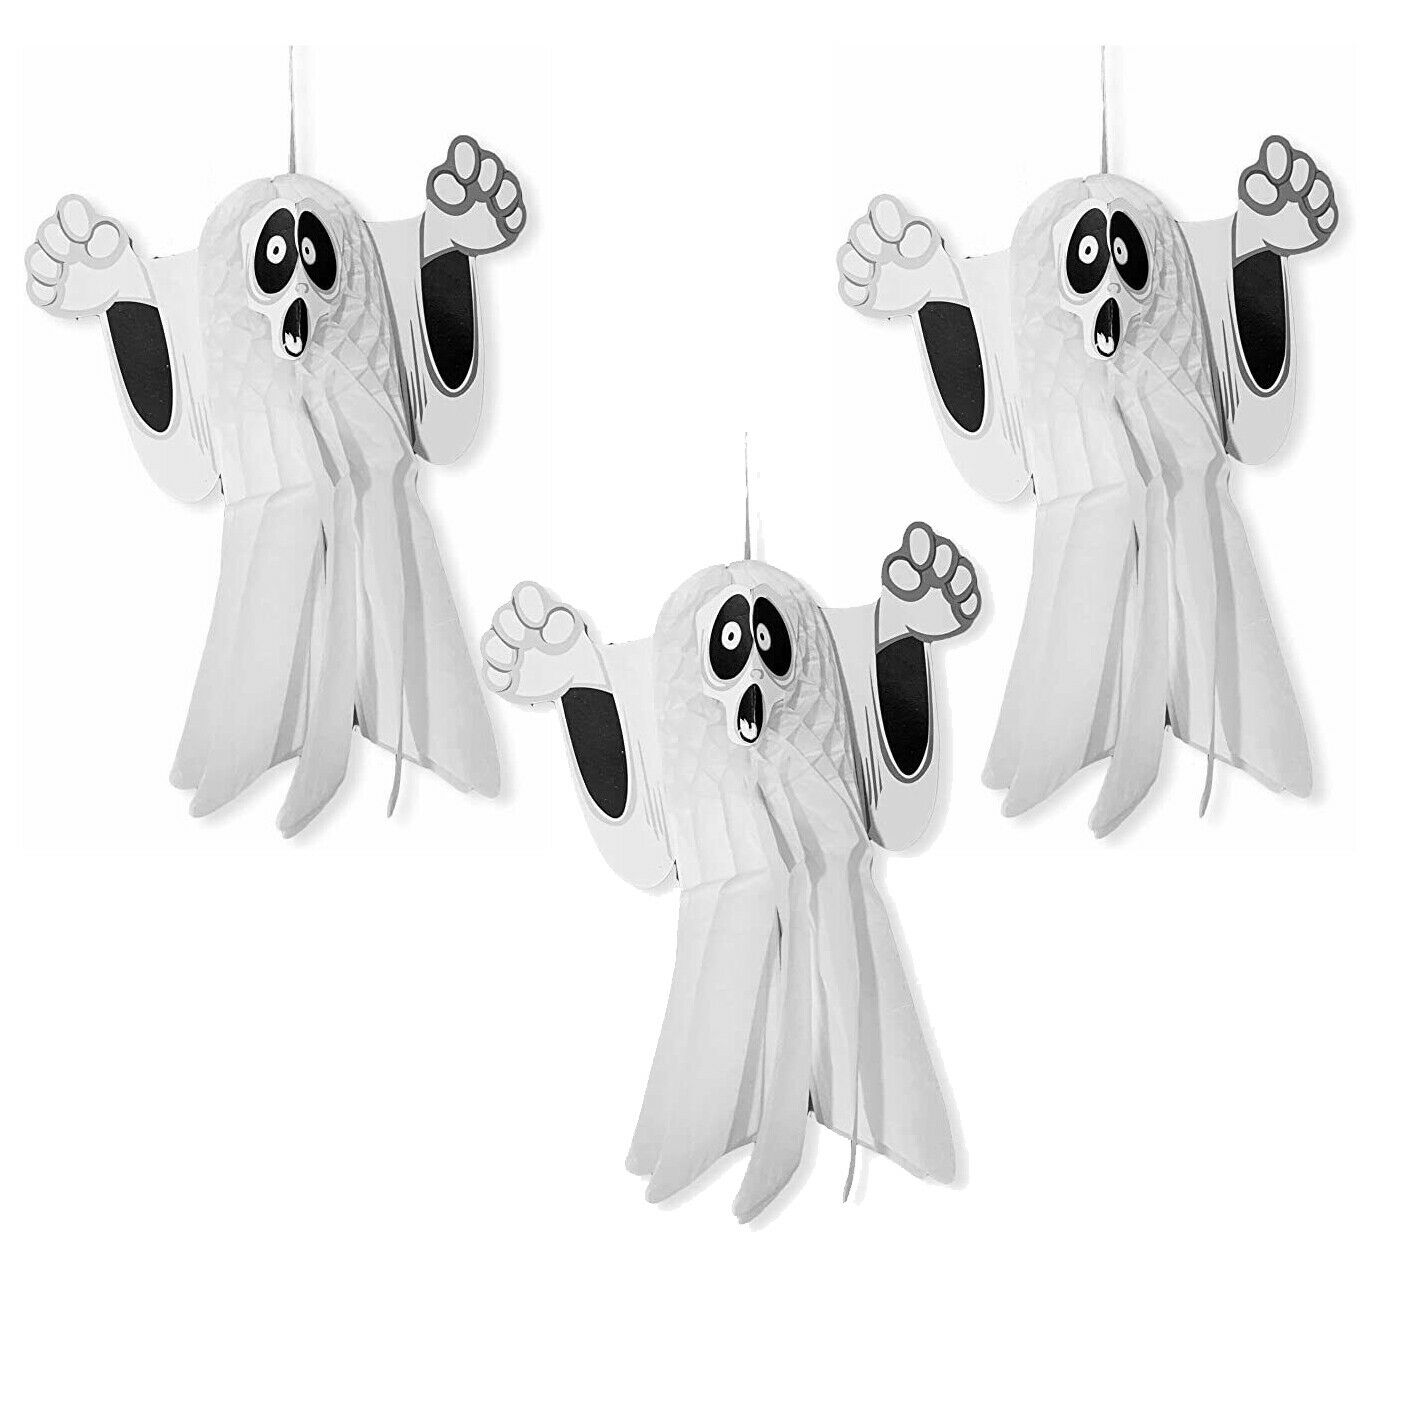 3 x Large Halloween Paper 3D Hanging Decorations Scary Black and White Ghost UK